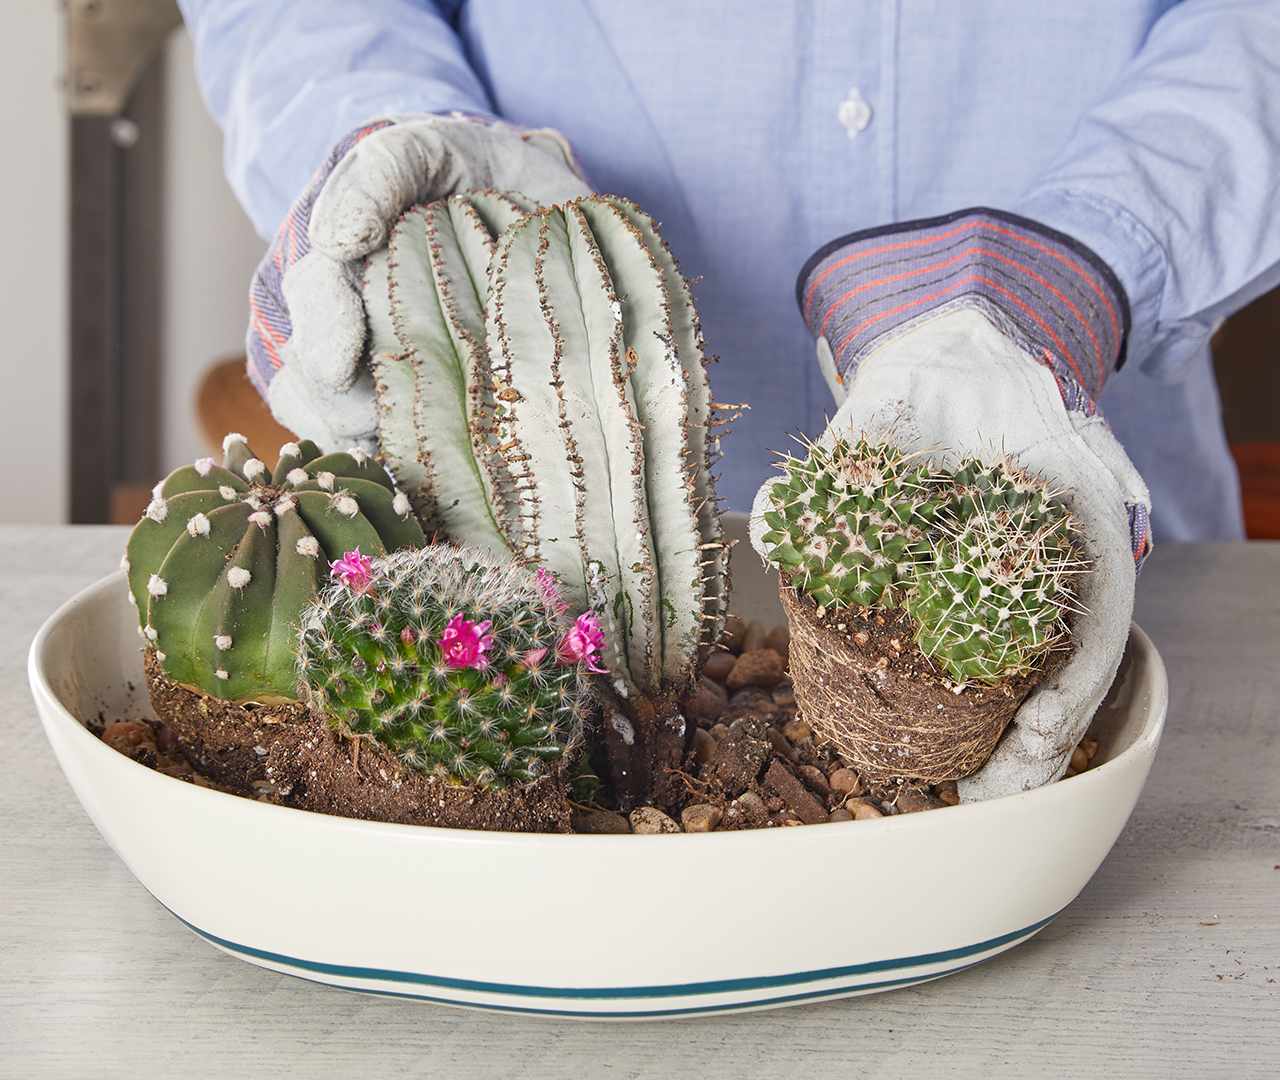 breaking up roots to get cactus on same level